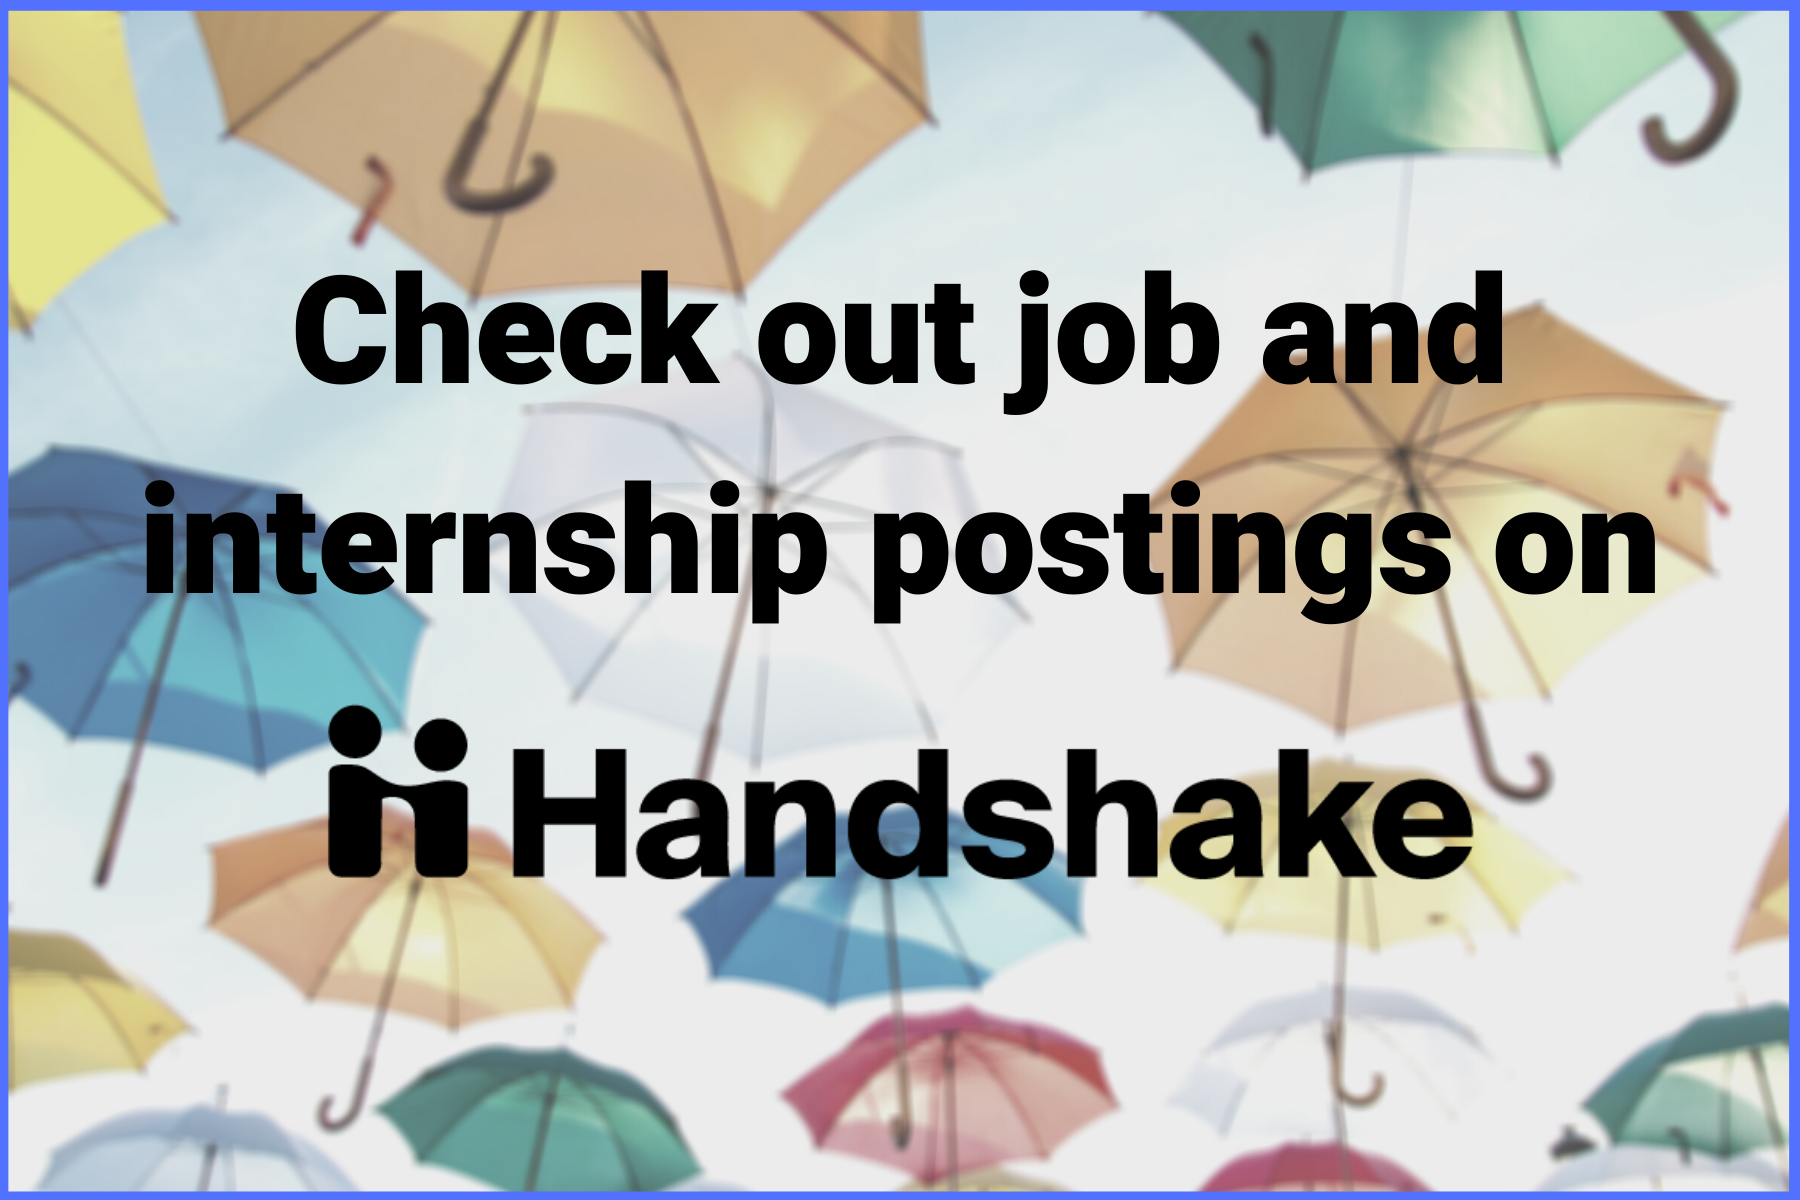 Find opportunities in the arts, media and communications on Handshake